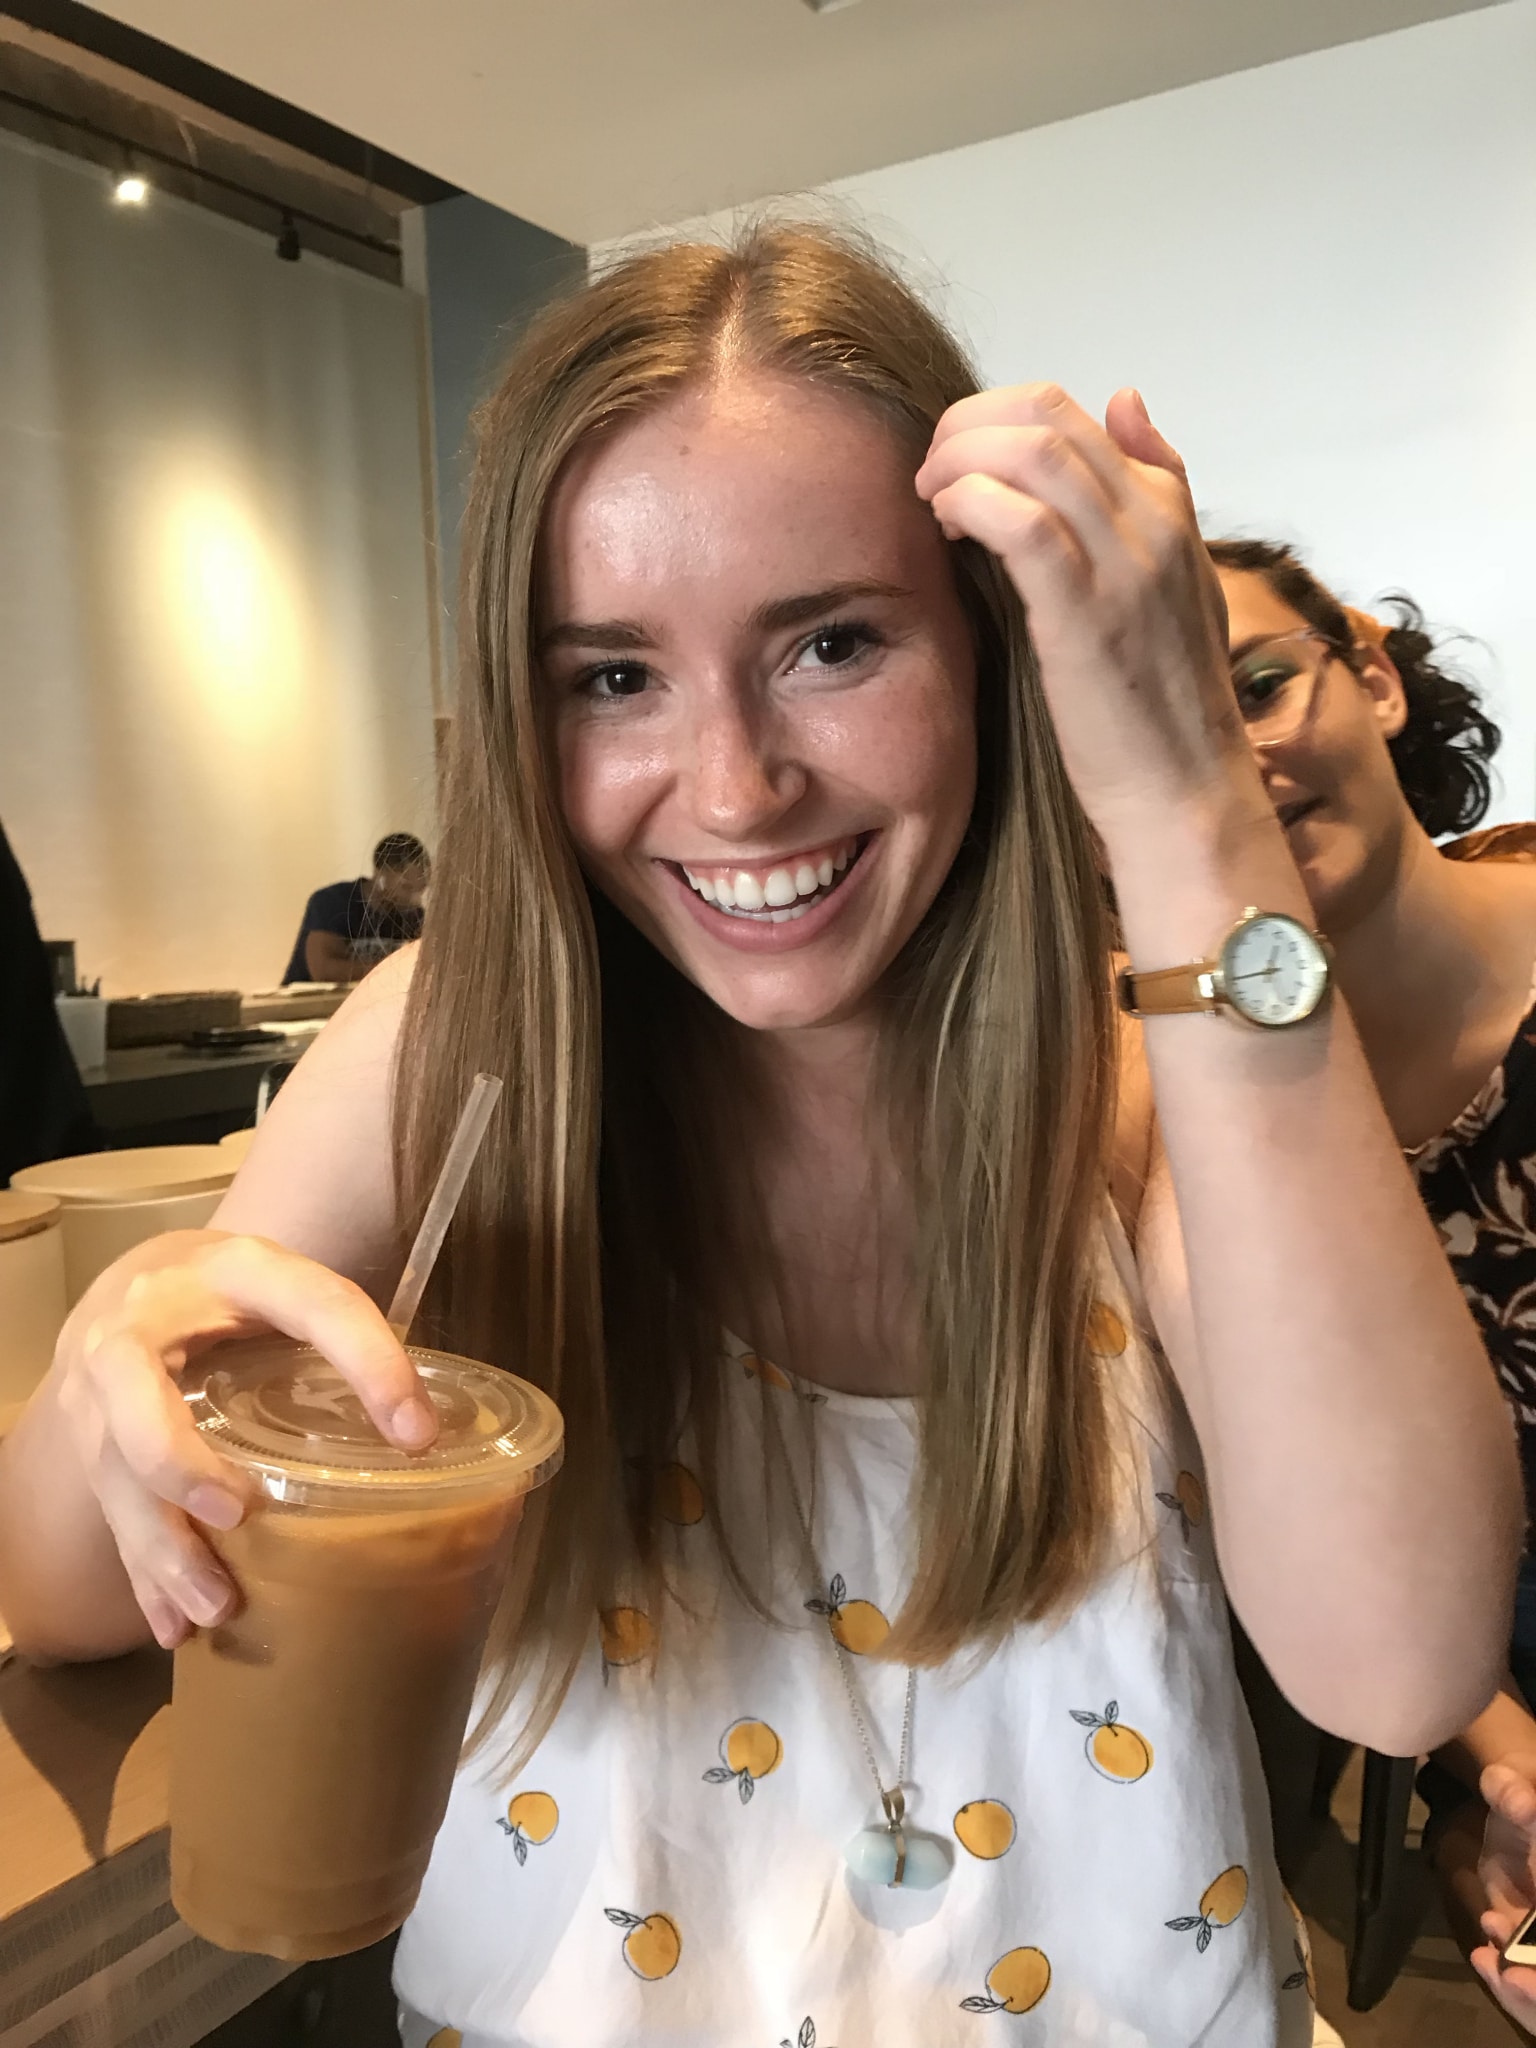 Revelator iced coffee photobomb Need some iced coffee? Here are 10 Birmingham coffee shops to grab a cup.